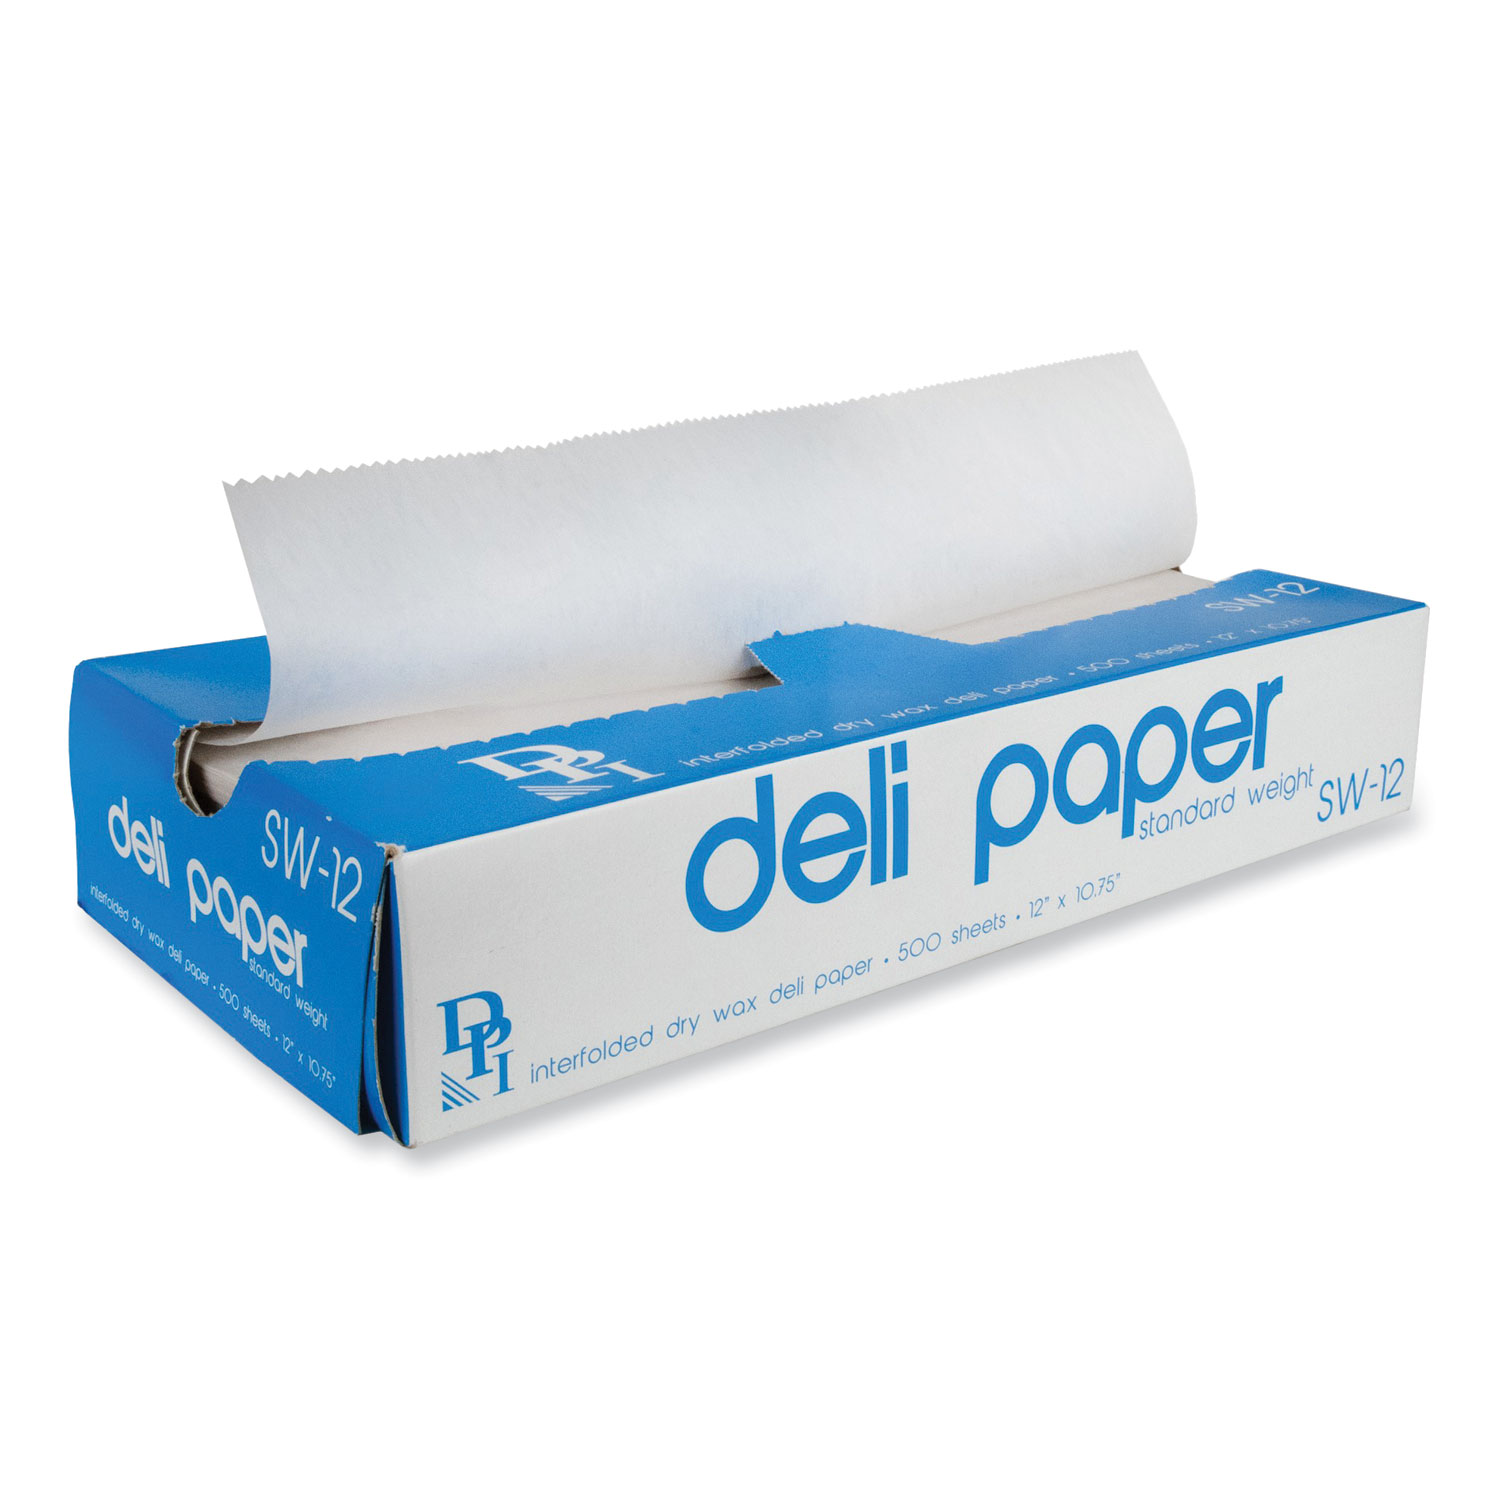 Waxed Interfolded Deli Paper